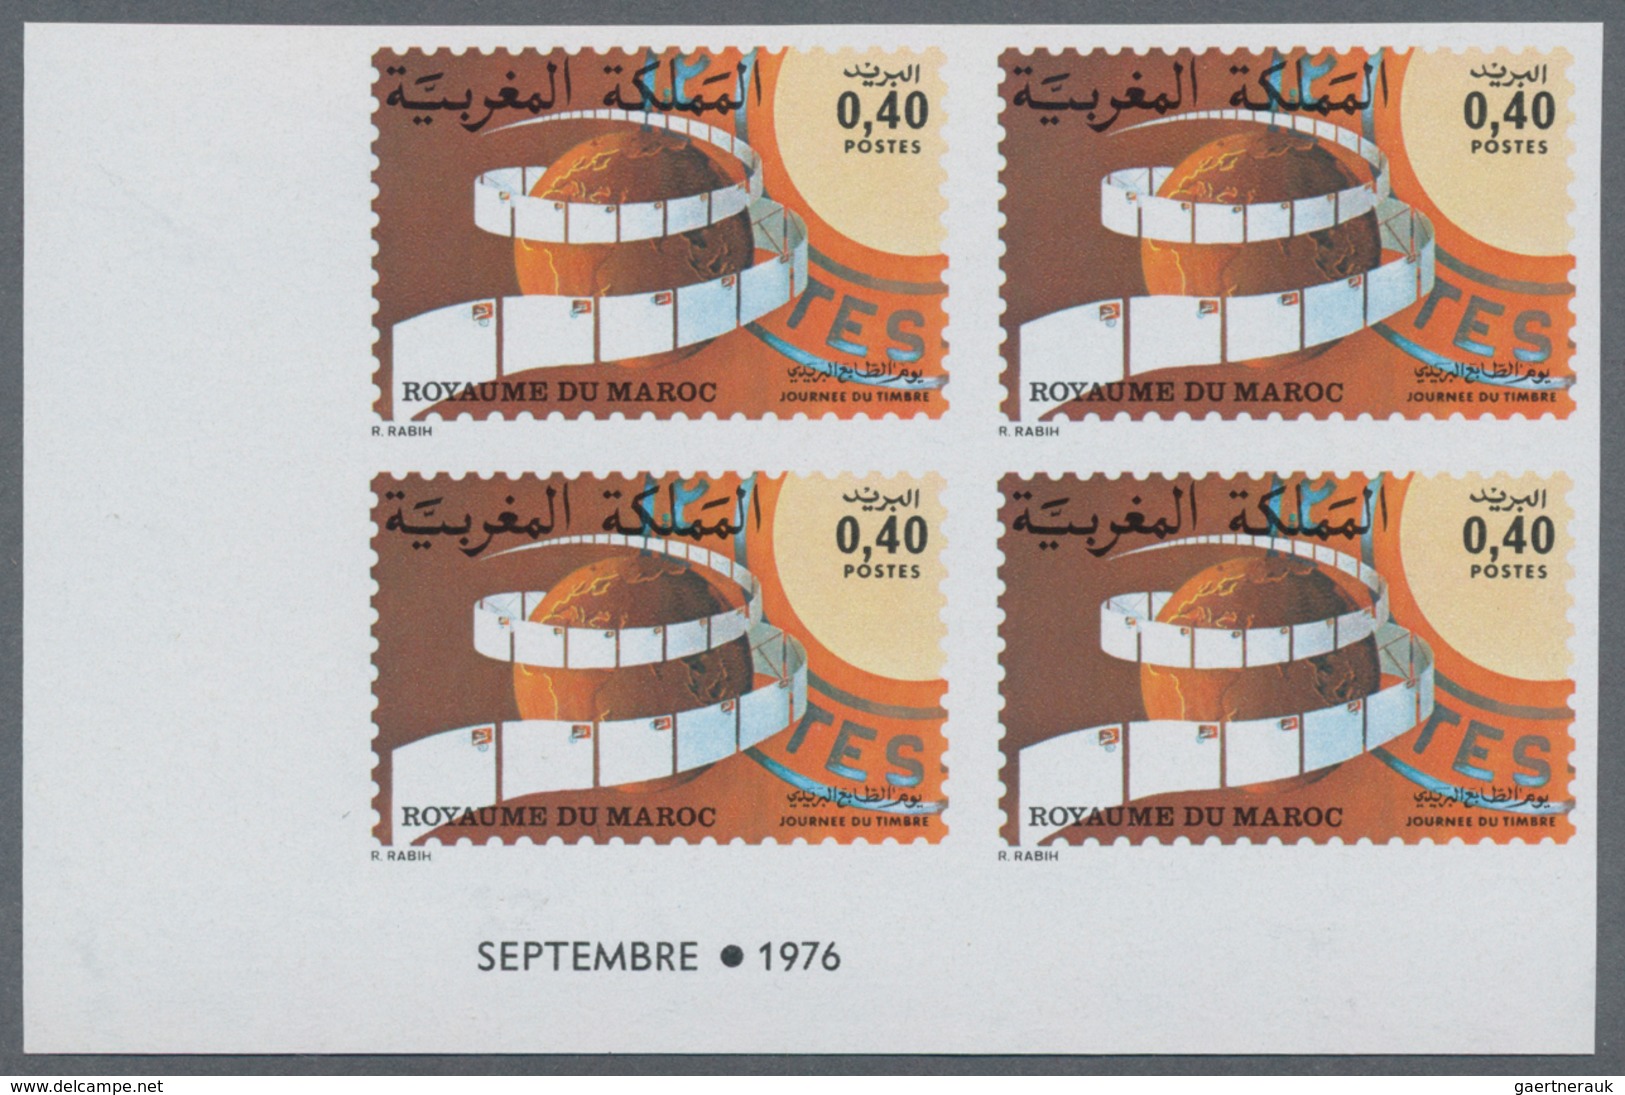 Marokko: 1975/1980 (ca.), accumulation with more than 10.000 (!) IMPERFORATE stamps mostly in comple